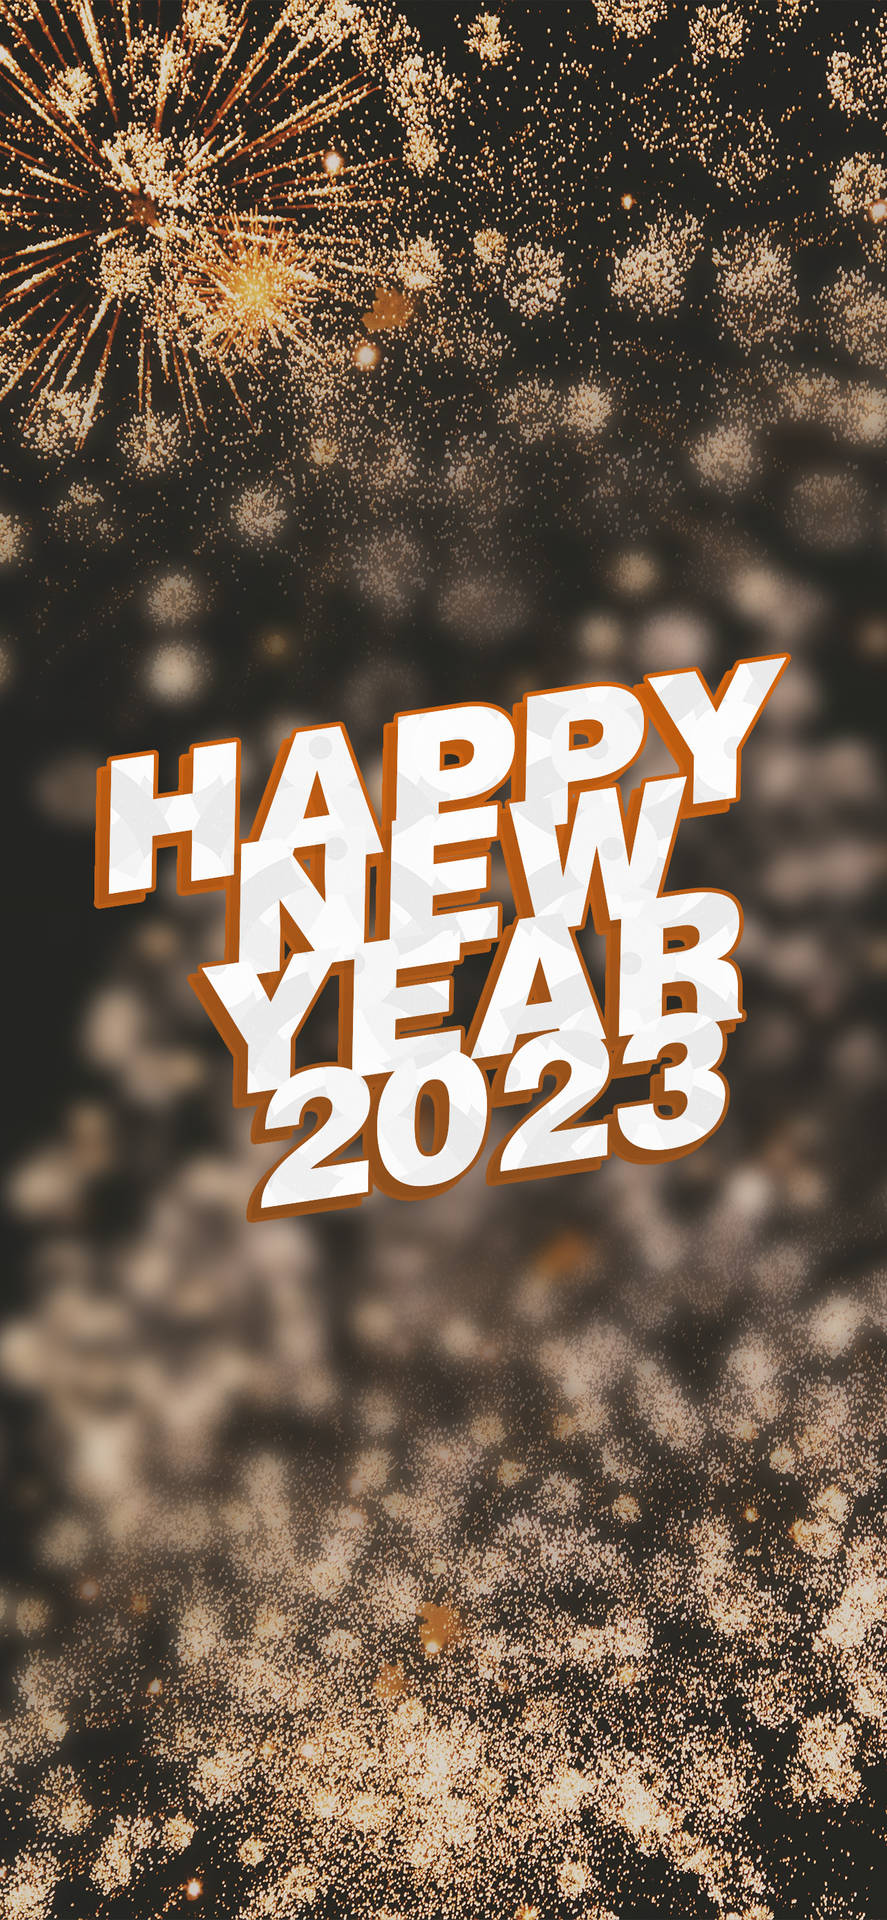 Download Glittering Happy New Year 2023 Greeting Wallpaper